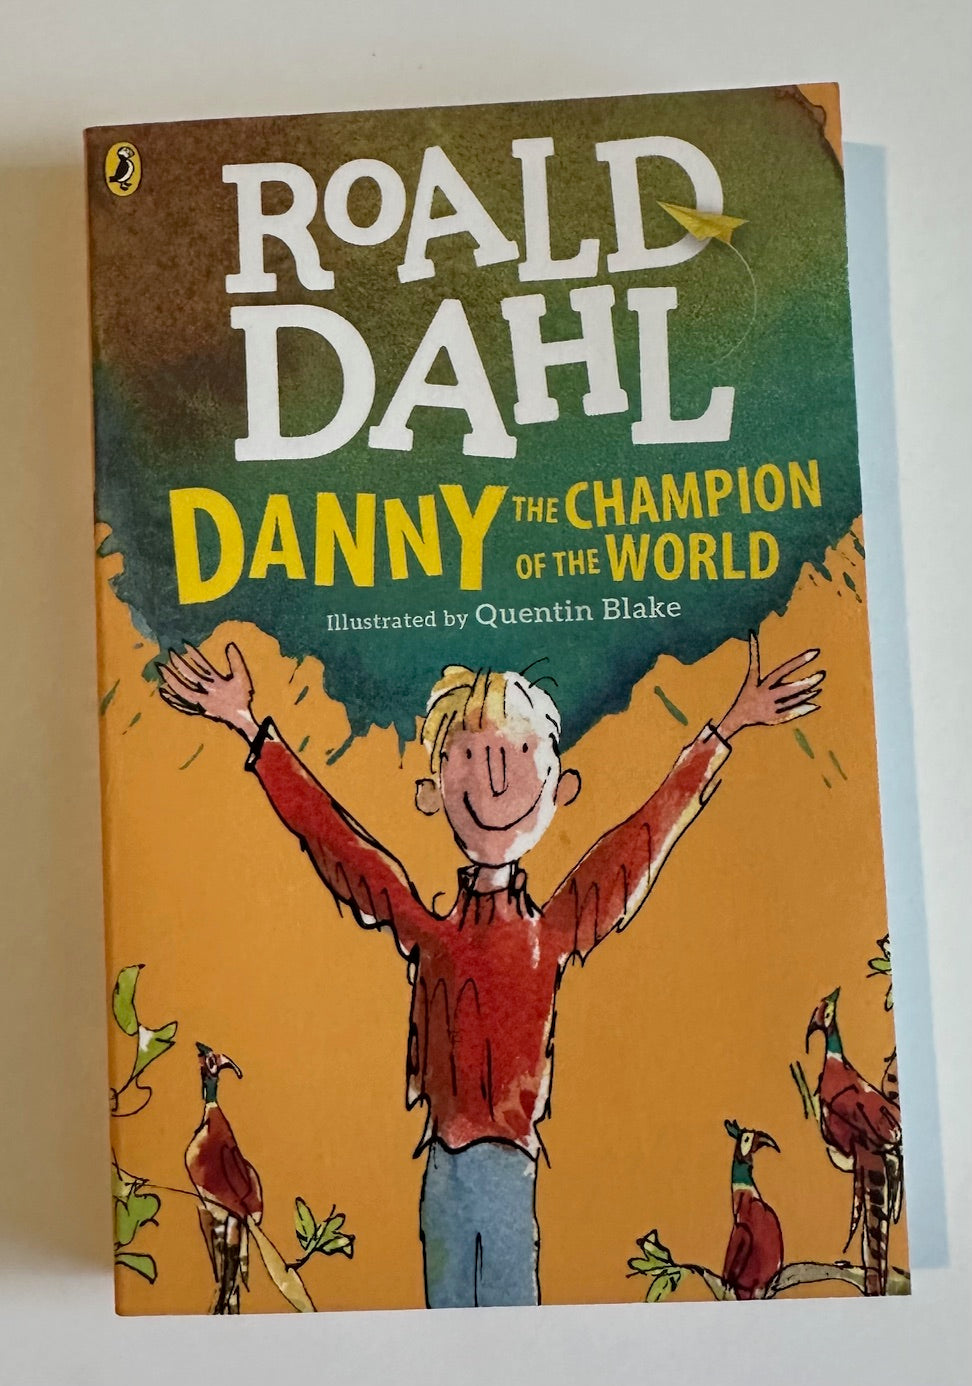 "Danny, the Champion of the World"